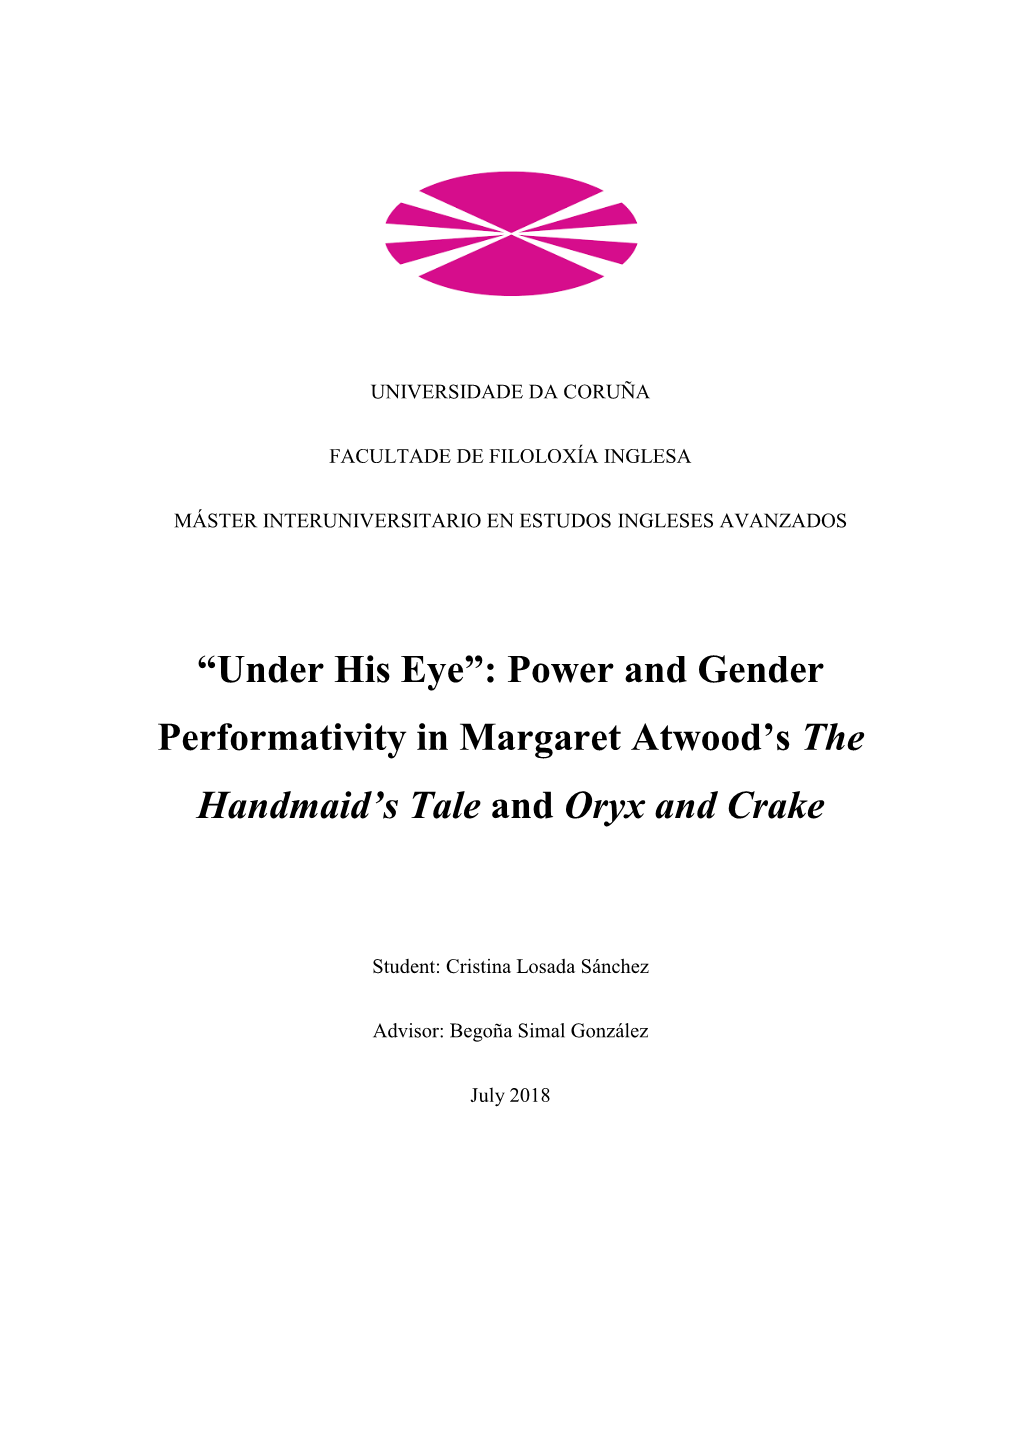 Power and Gender Performativity in Margaret Atwood's the Handmaid's